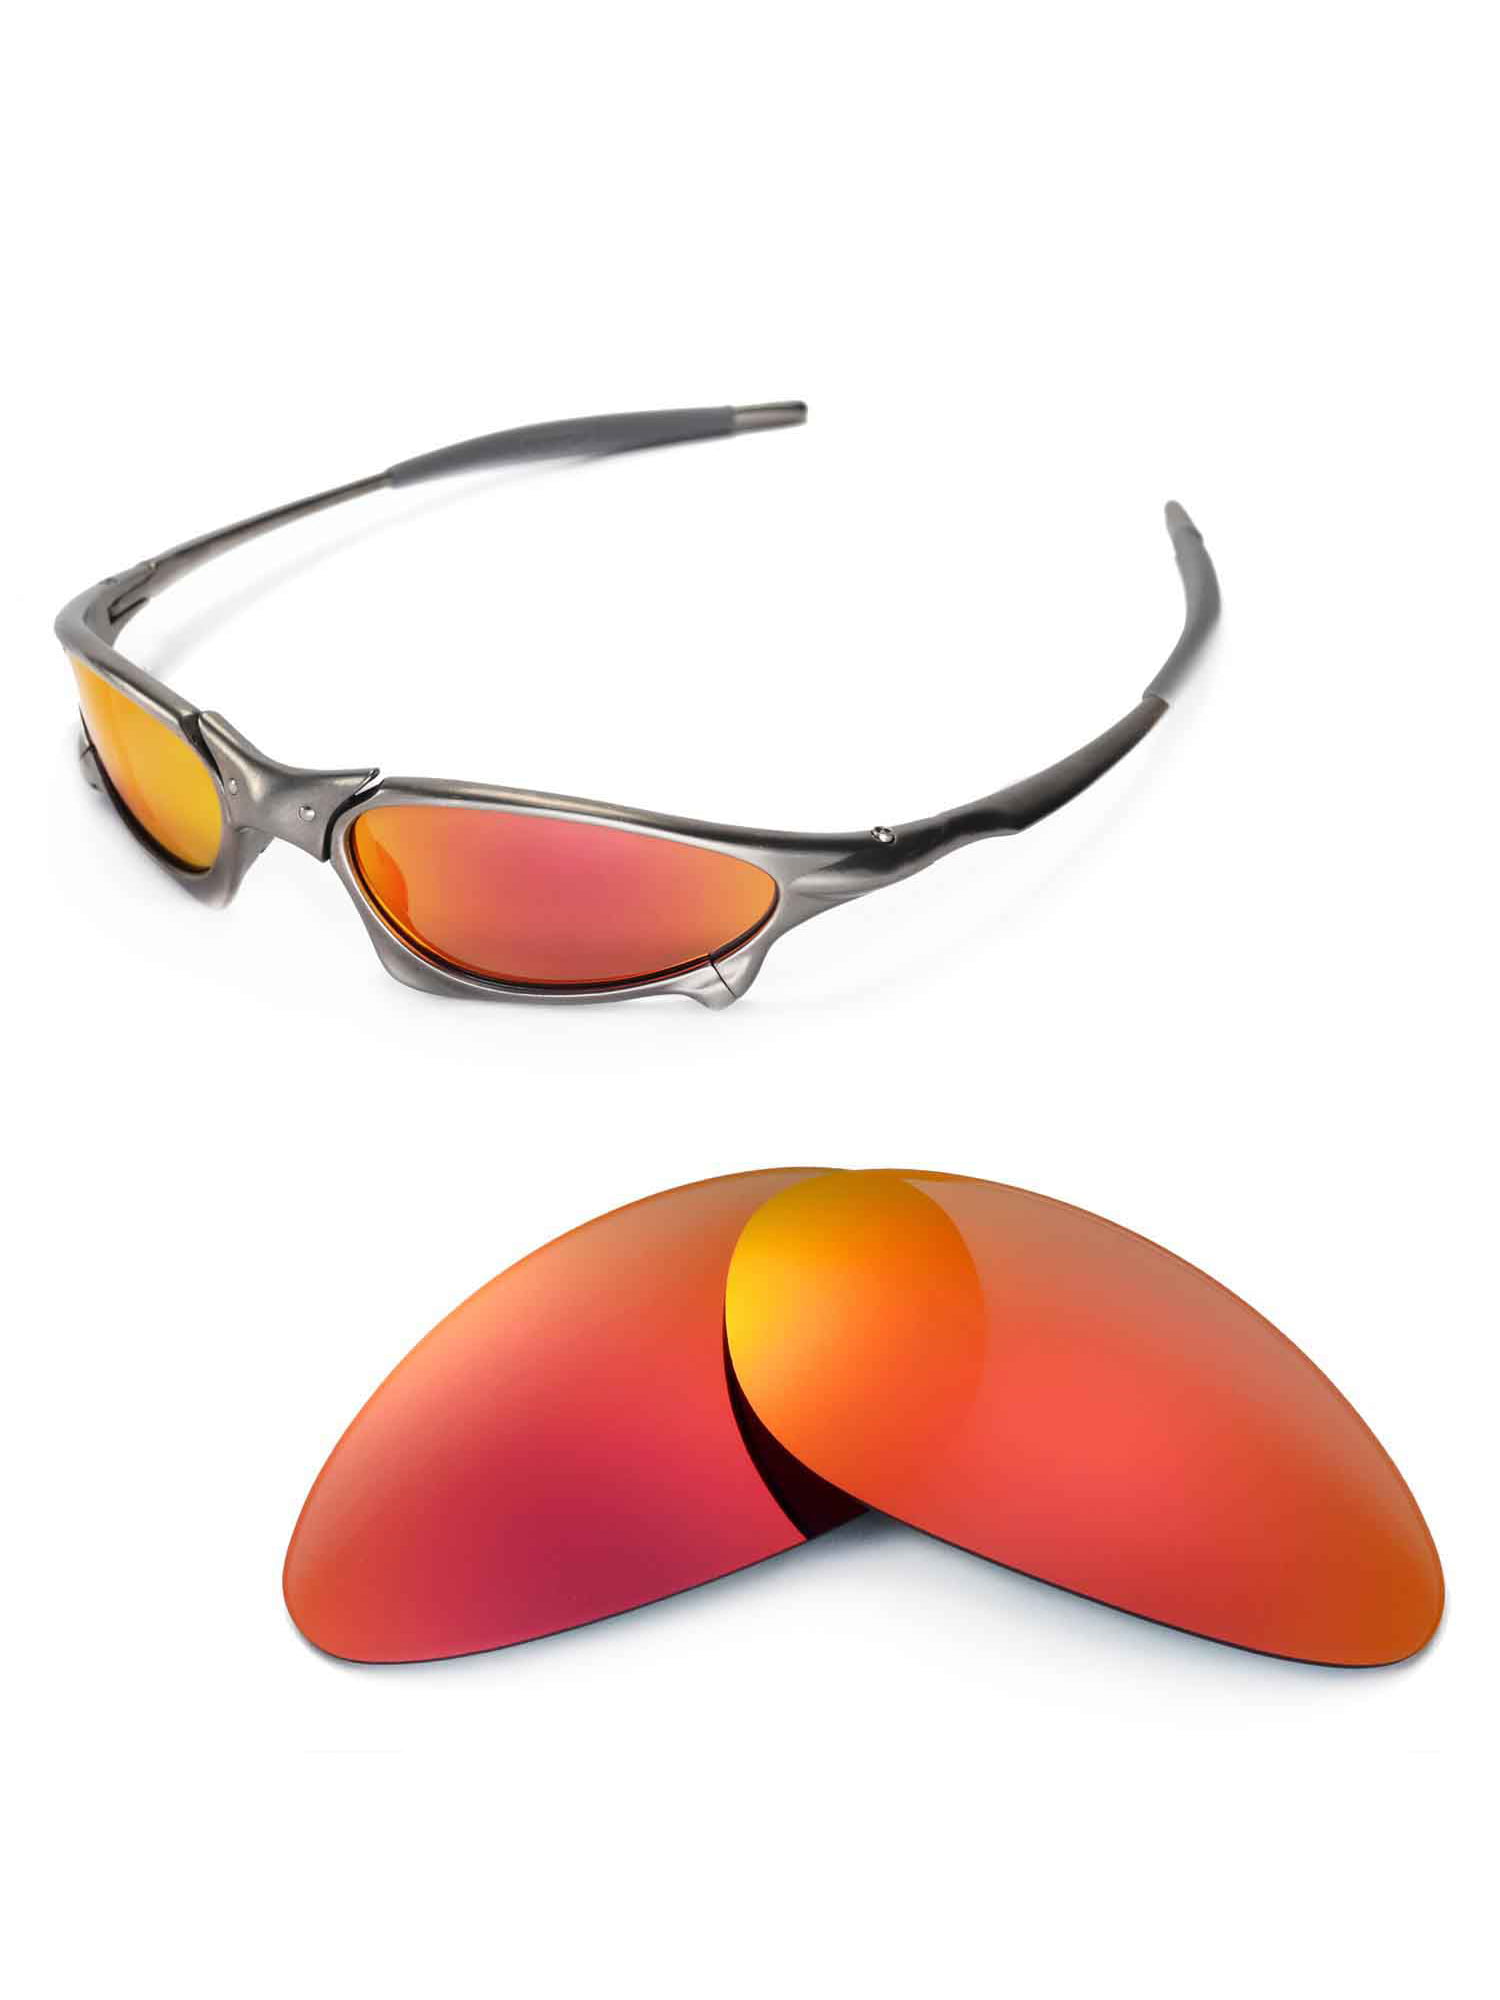 Oakley Penny Replacement Lenses by Revant Optics